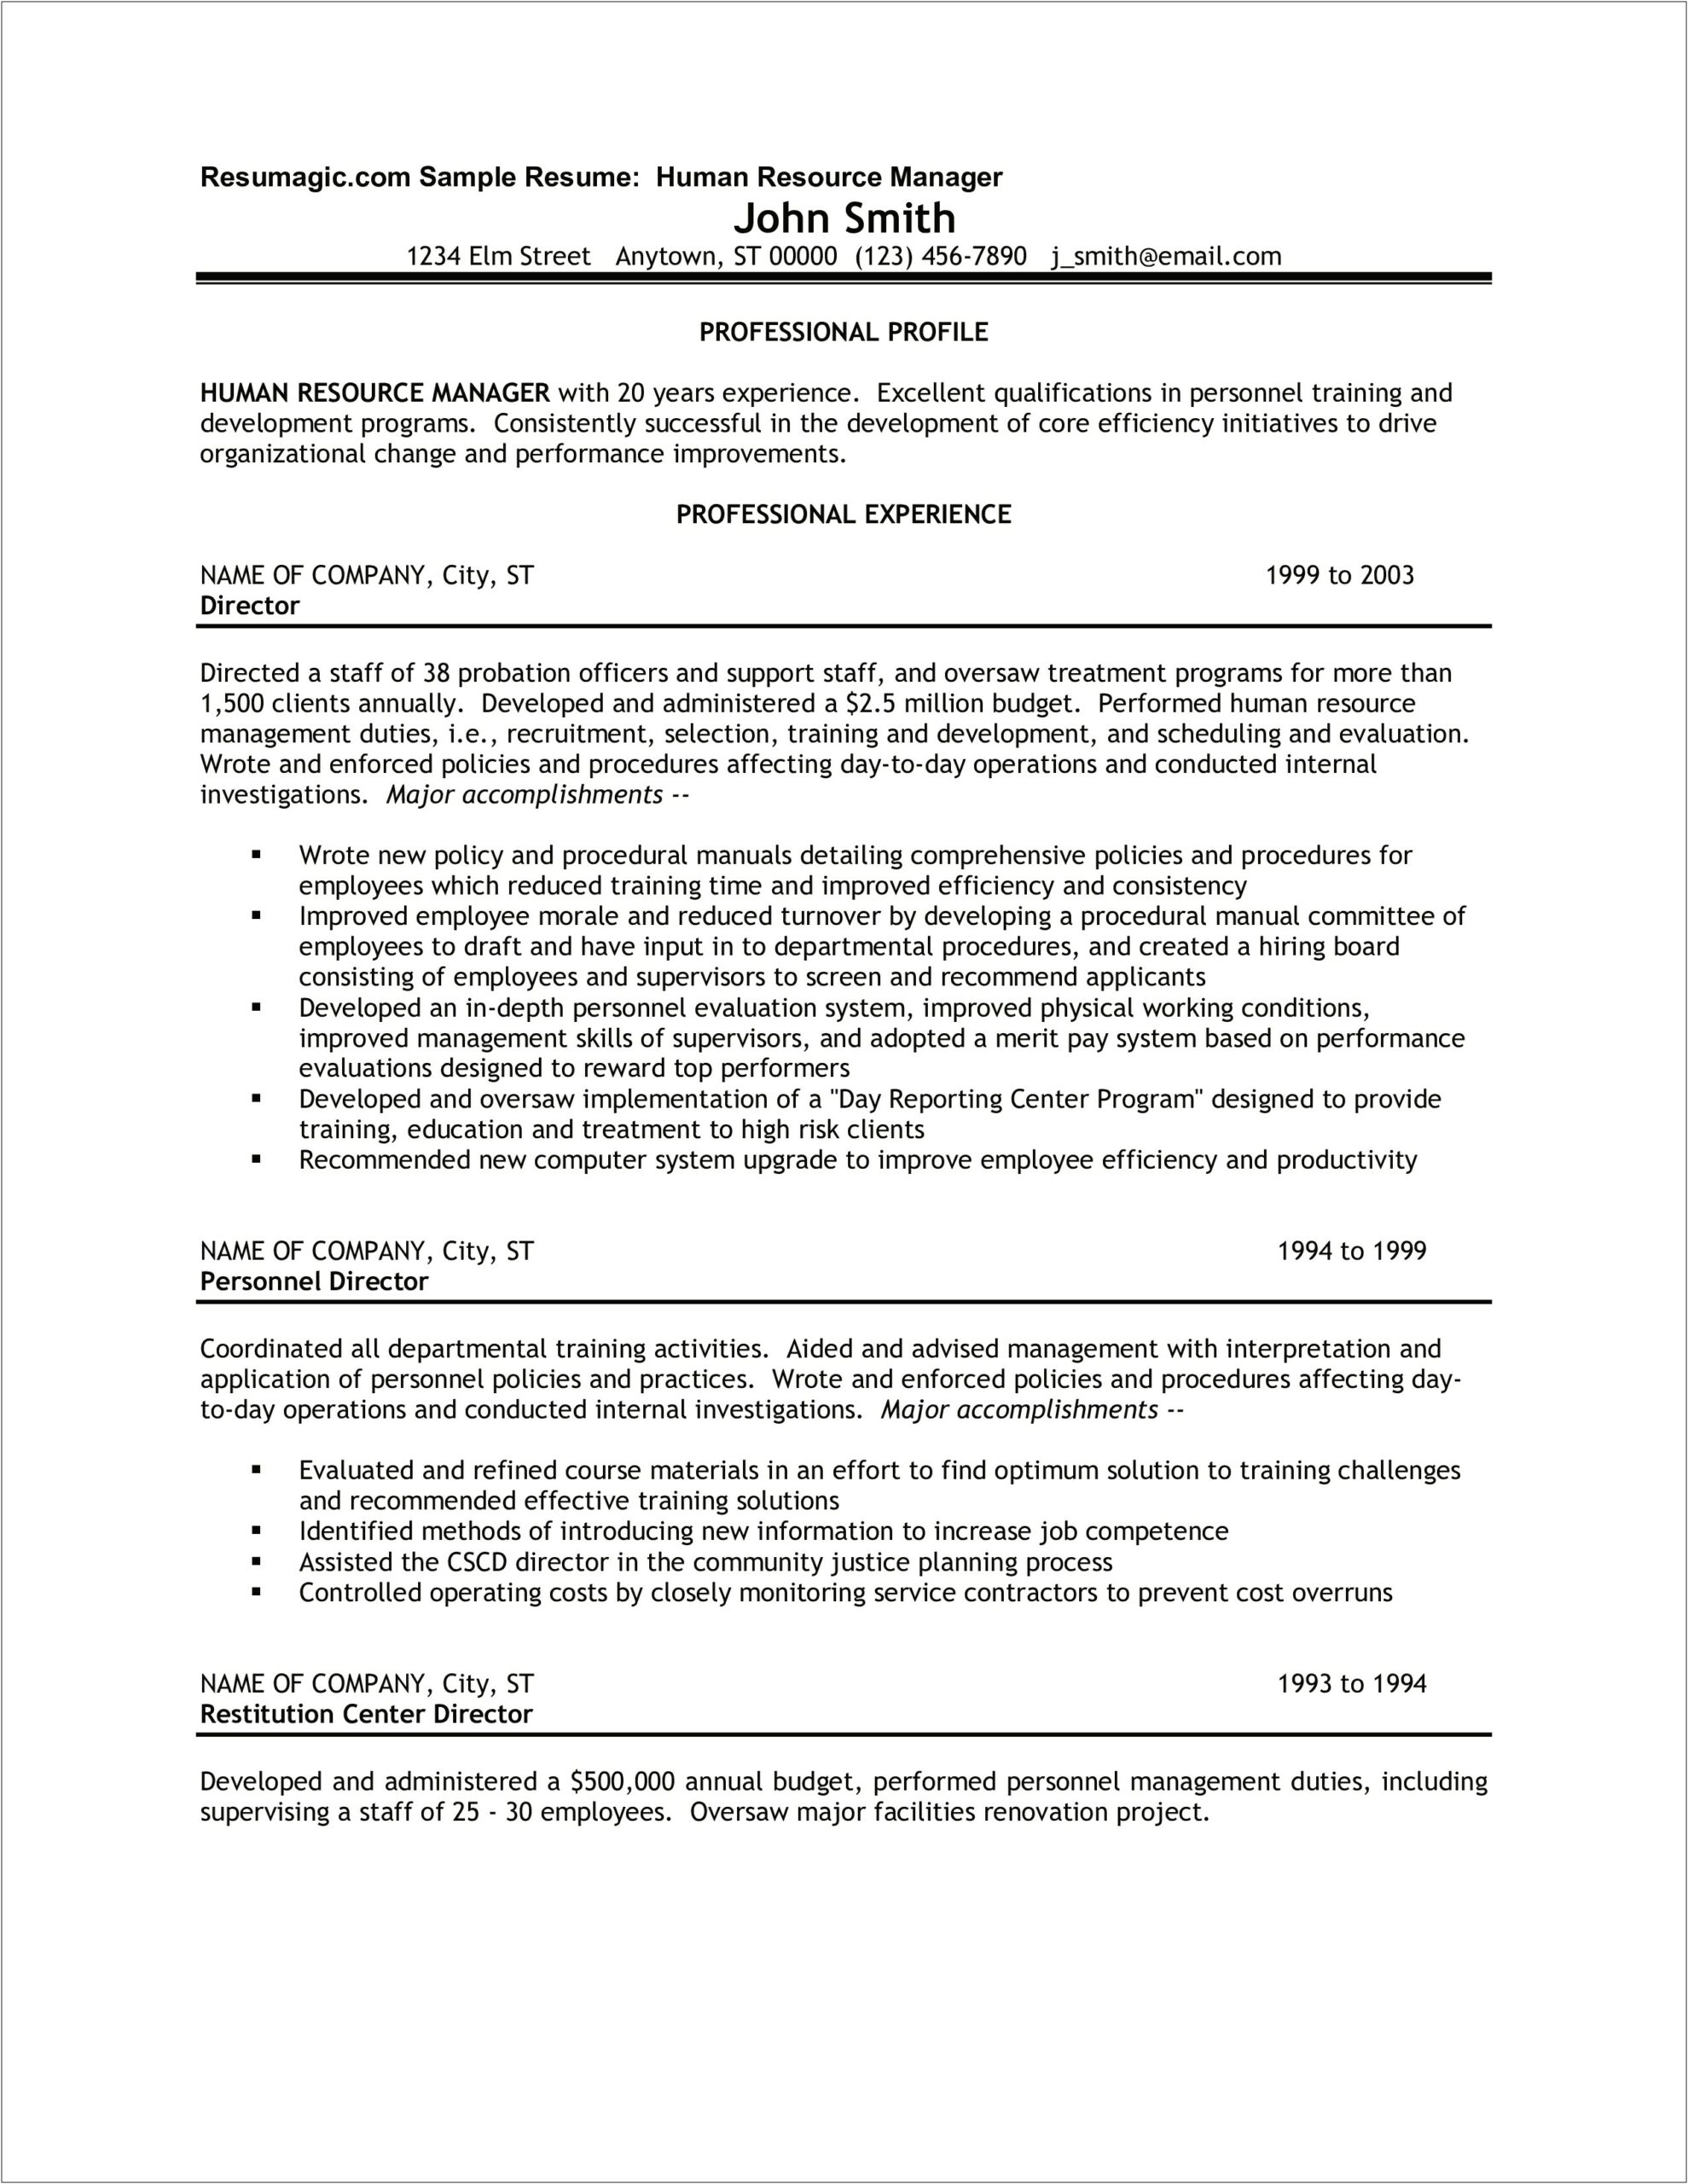 Example Of Applicant Resume For Hrm